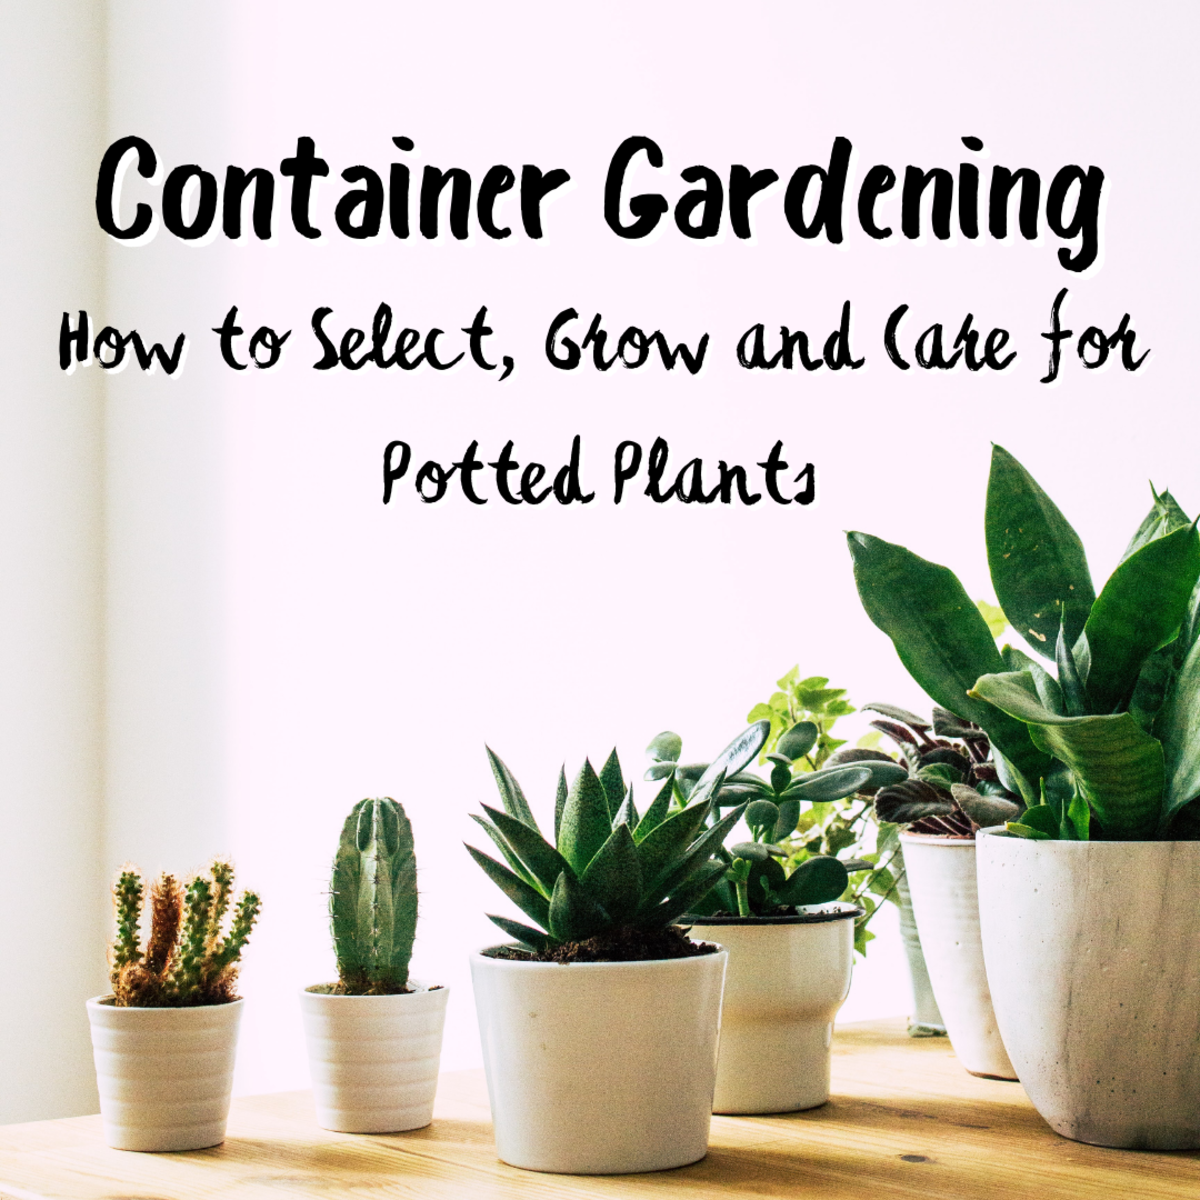 Learn all about container gardening, from choosing your pots and flowers, to growing and caring your plants.